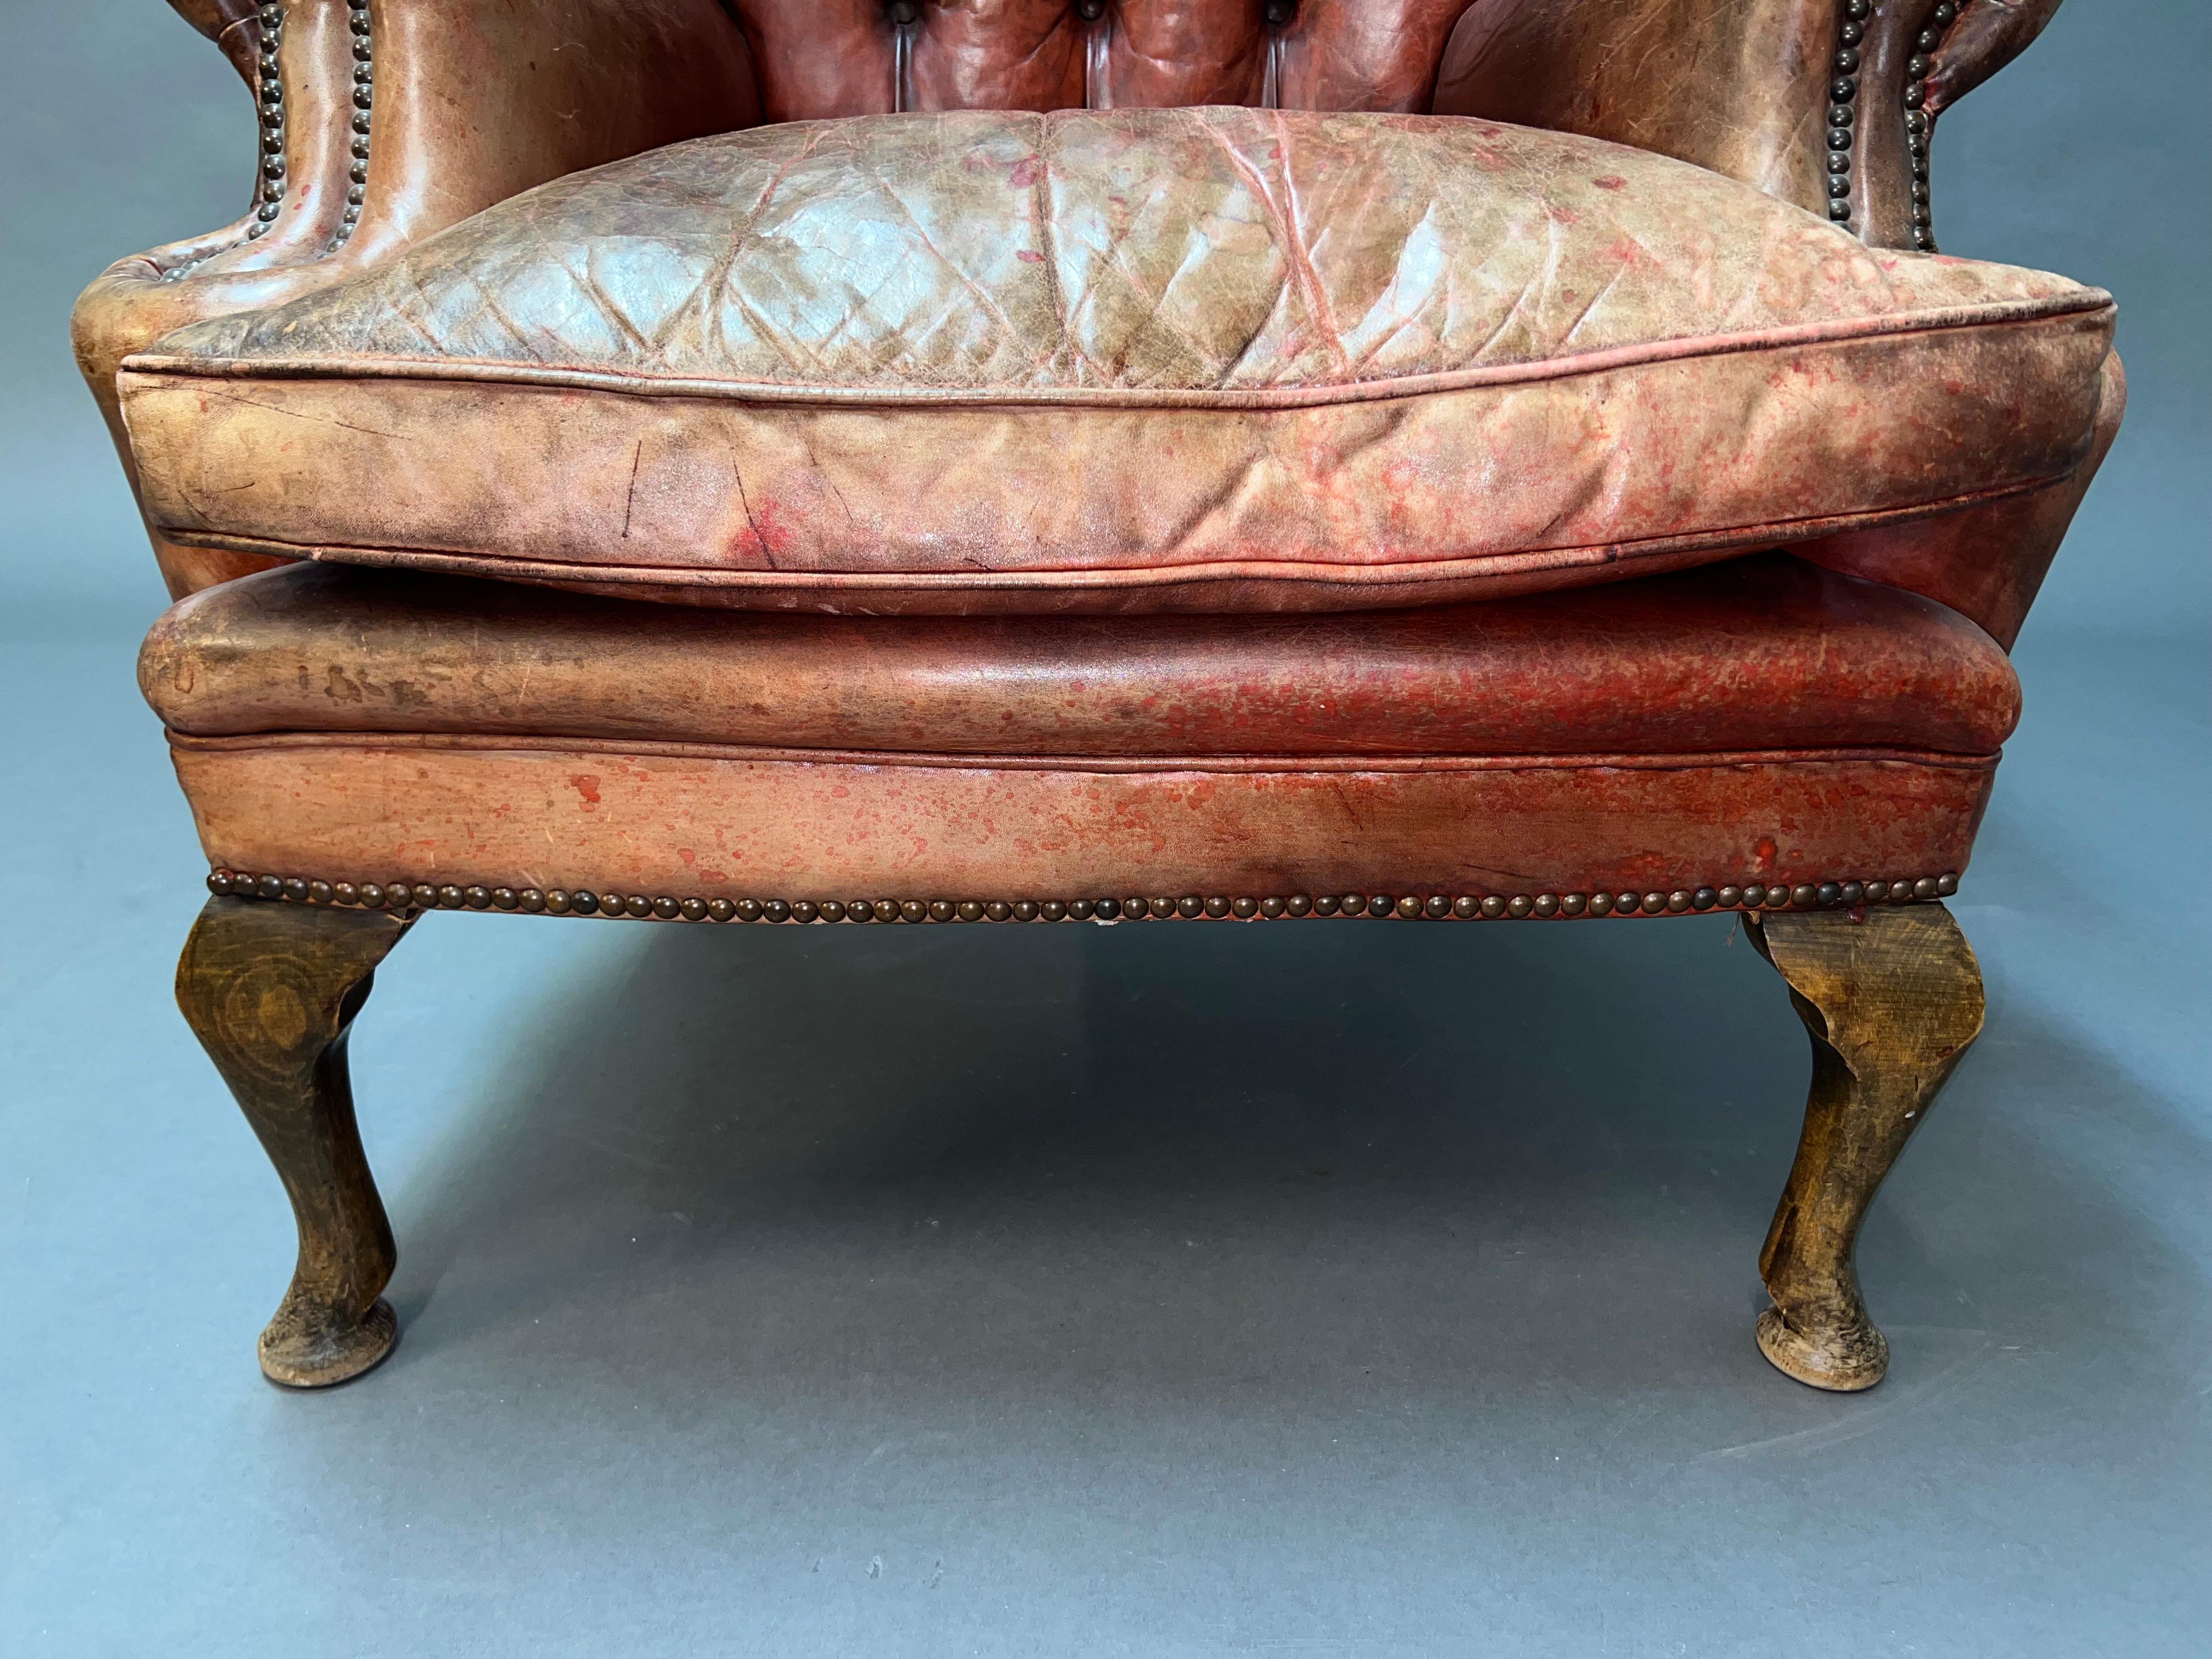 Vintage Brown Leather Tufted Chesterfield Wingback Armchair Original, circa 1880 For Sale 3